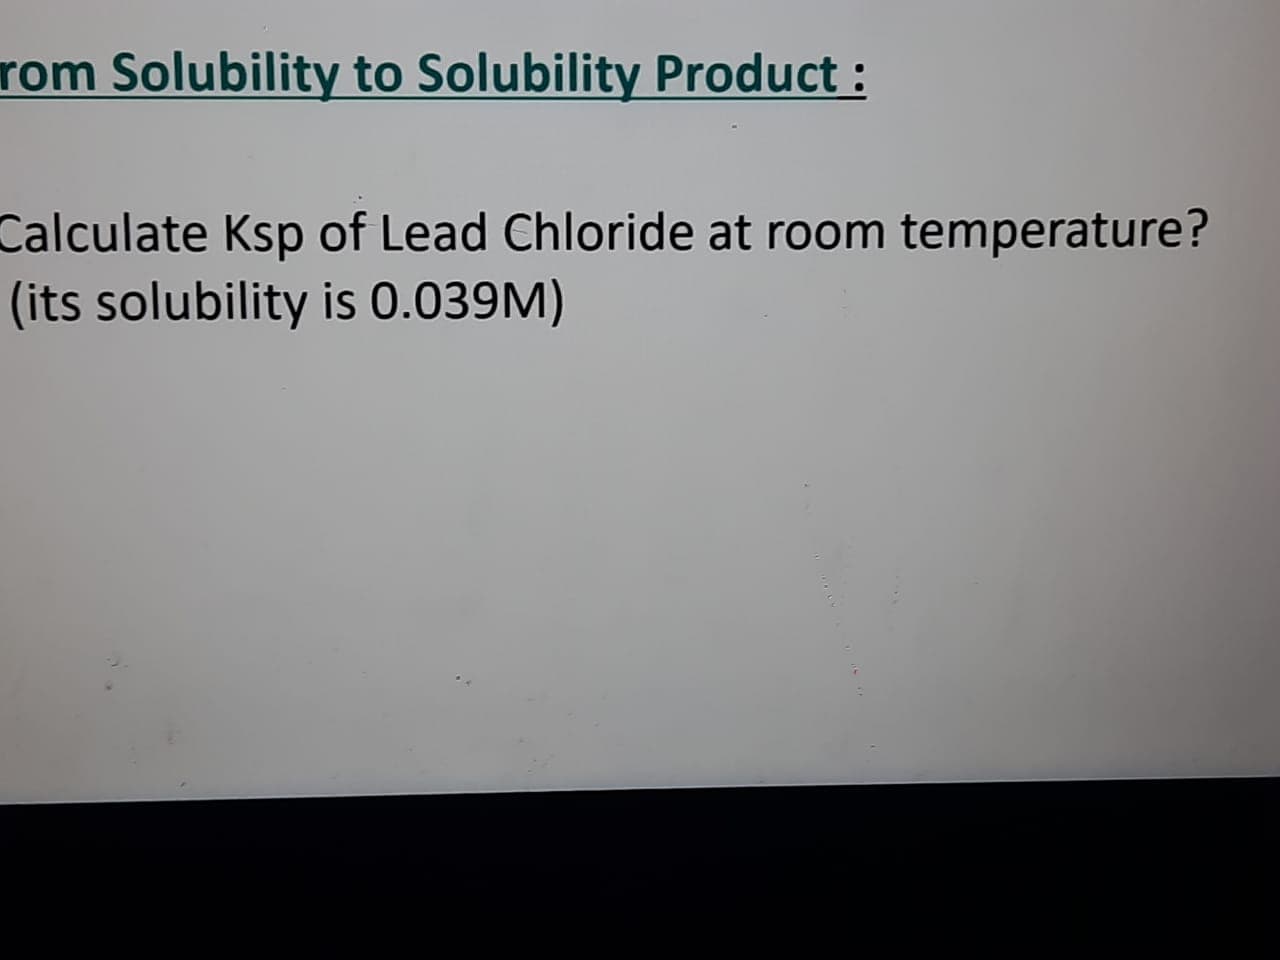 Calculate Ksp of Lead Chloride at room temperature?
(its solubility is 0.039M)
